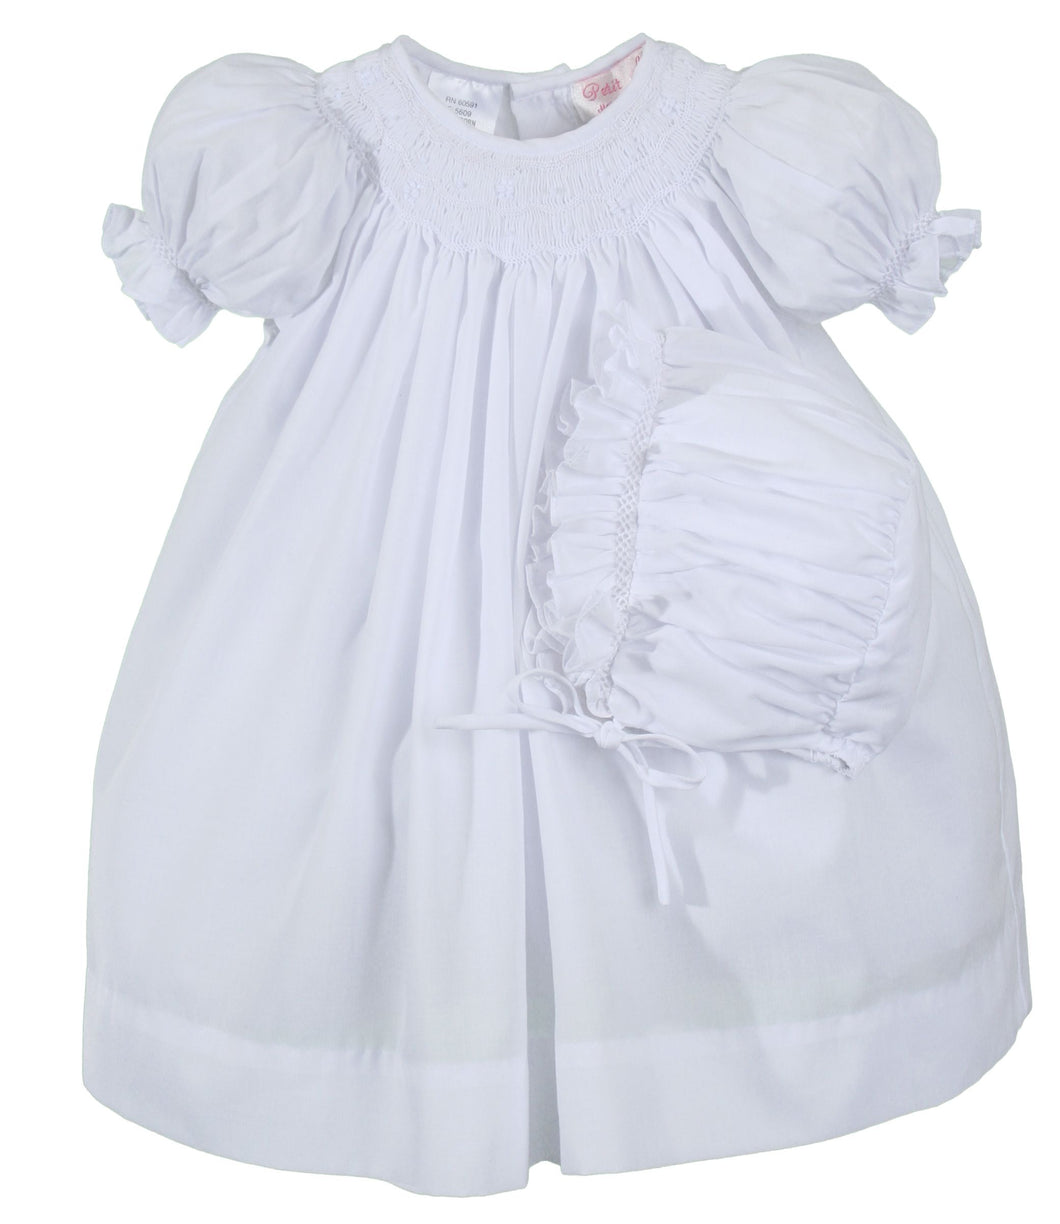 White Smocked Daydress with Bonnet